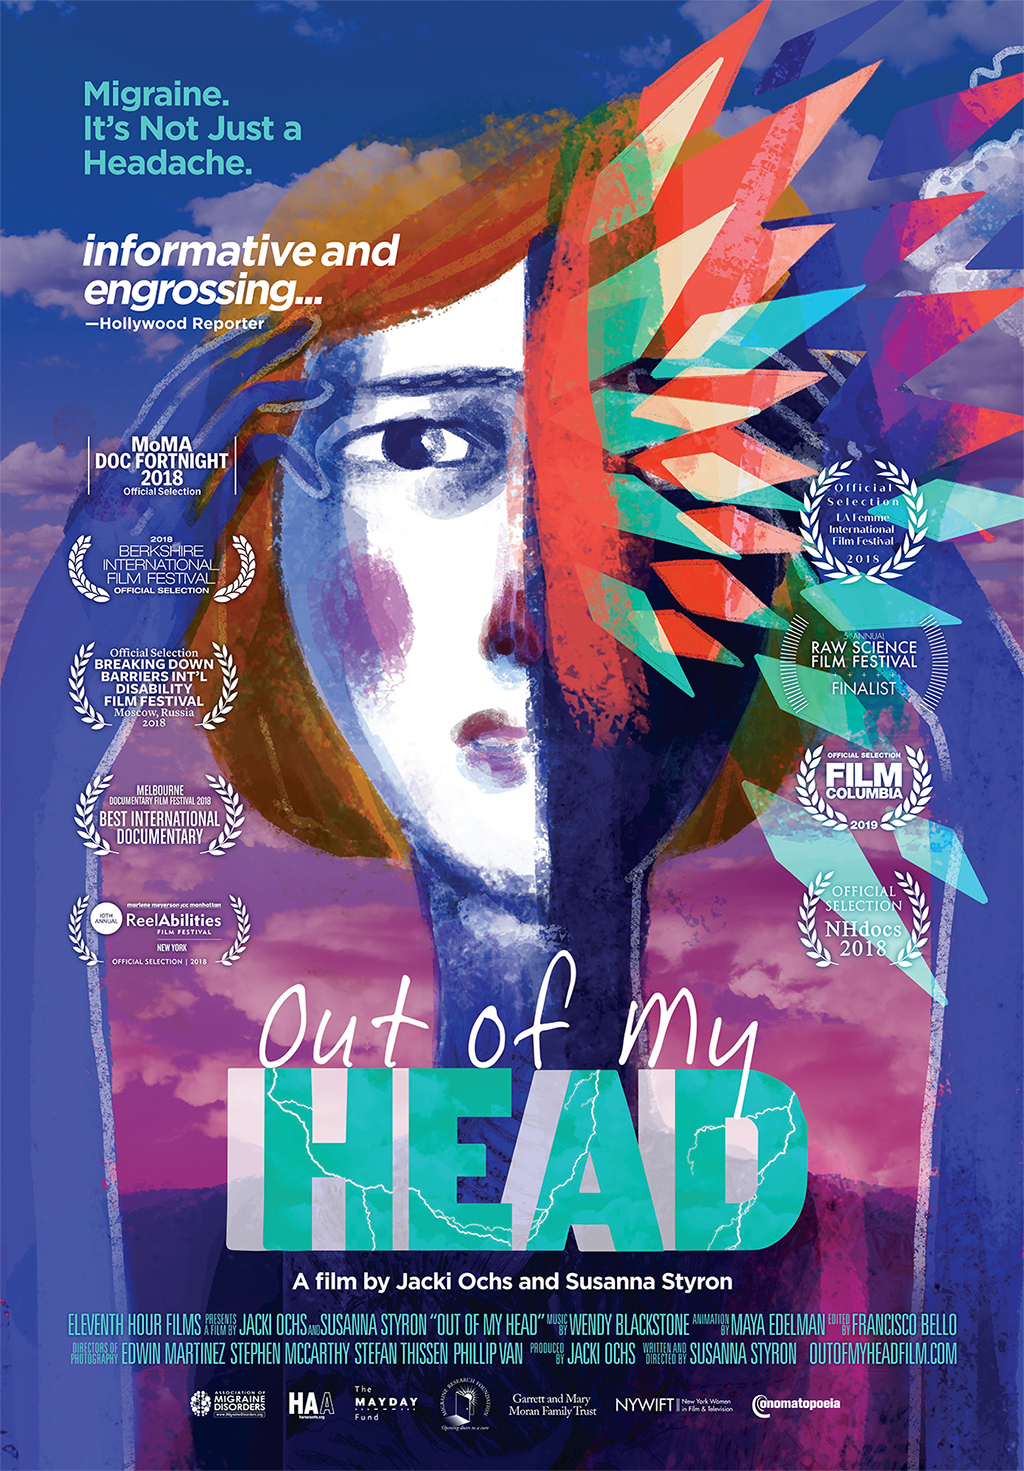 Out of My Head poster. It's Not Just a Headache